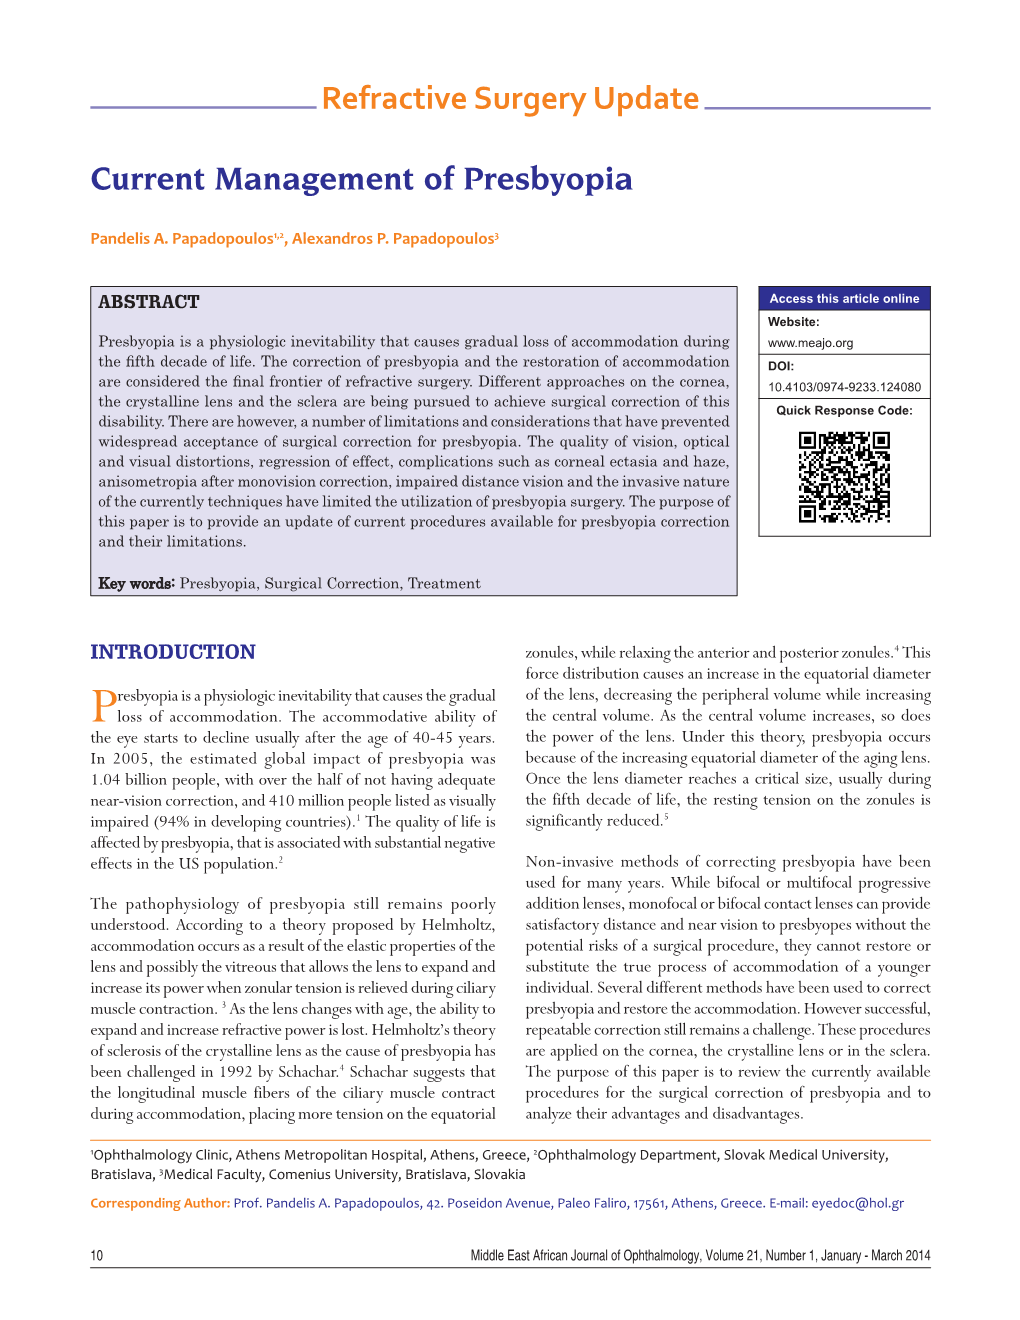 Current Management of Presbyopia Refractive Surgery Update